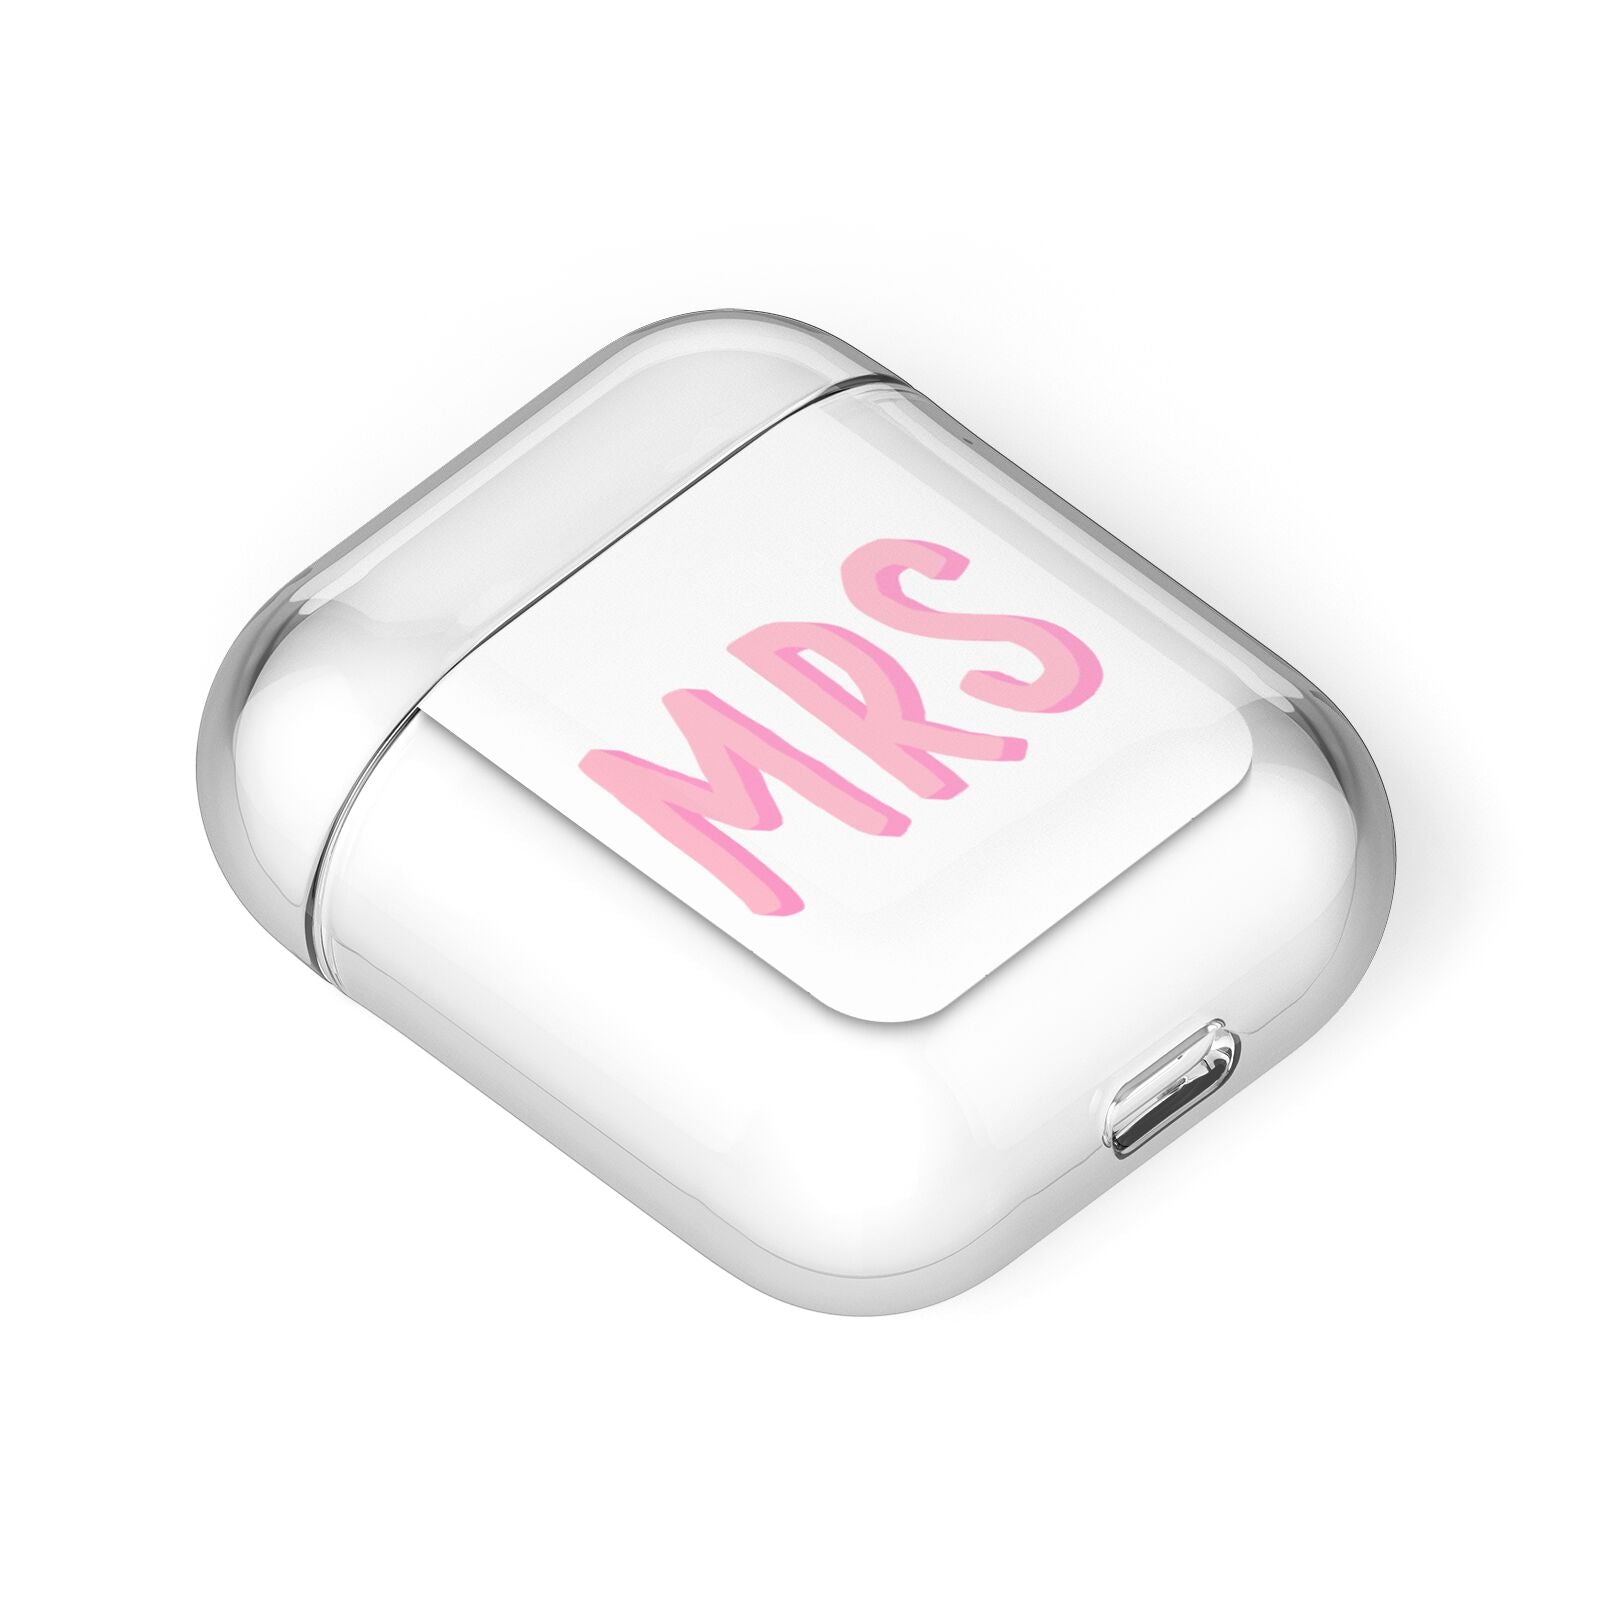 Mrs AirPods Case Laid Flat